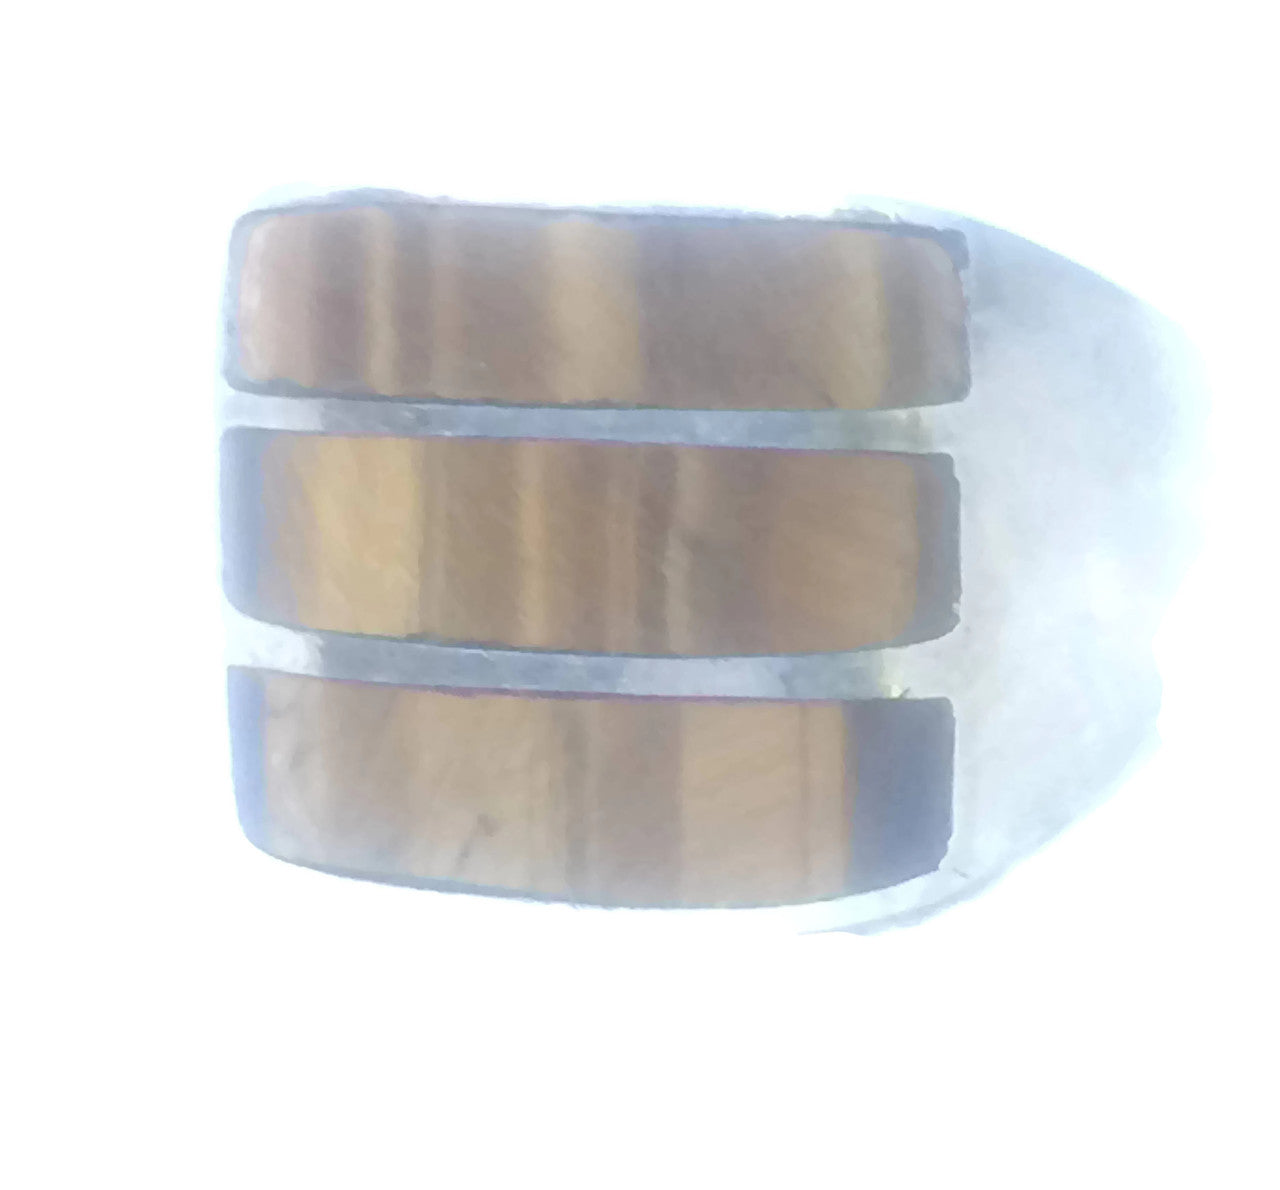 Tiger Eye Ring  Sterling Silver  Mexico Size 11